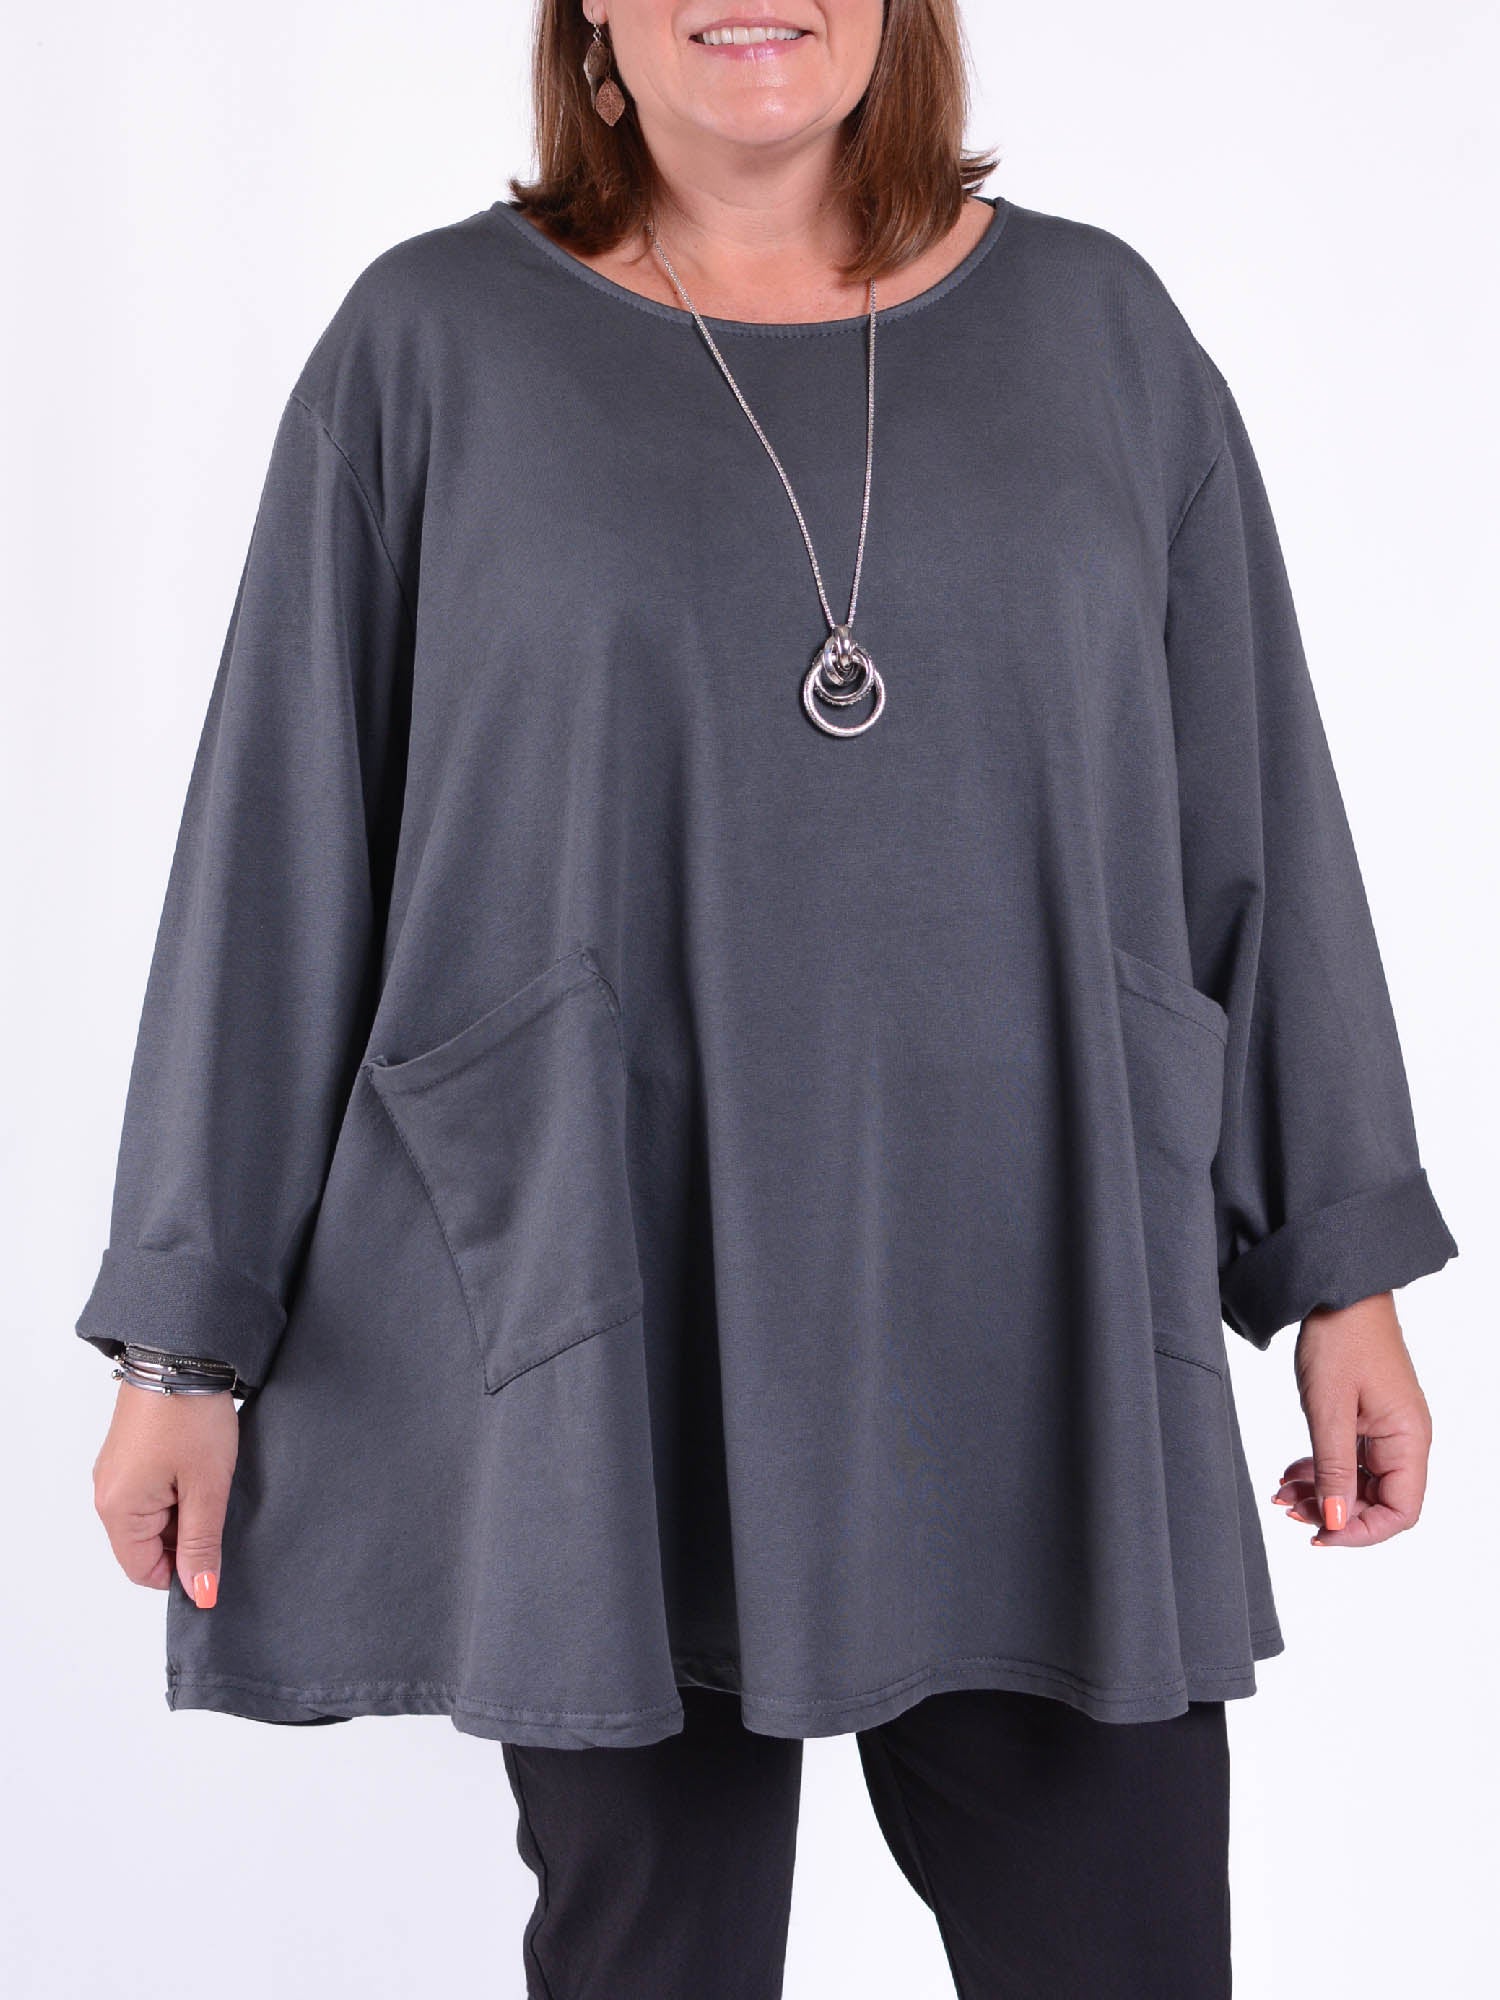 Long Sleeved Cotton Swing Top with pockets - 11924, Tops & Shirts, Pure Plus Clothing, Lagenlook Clothing, Plus Size Fashion, Over 50 Fashion